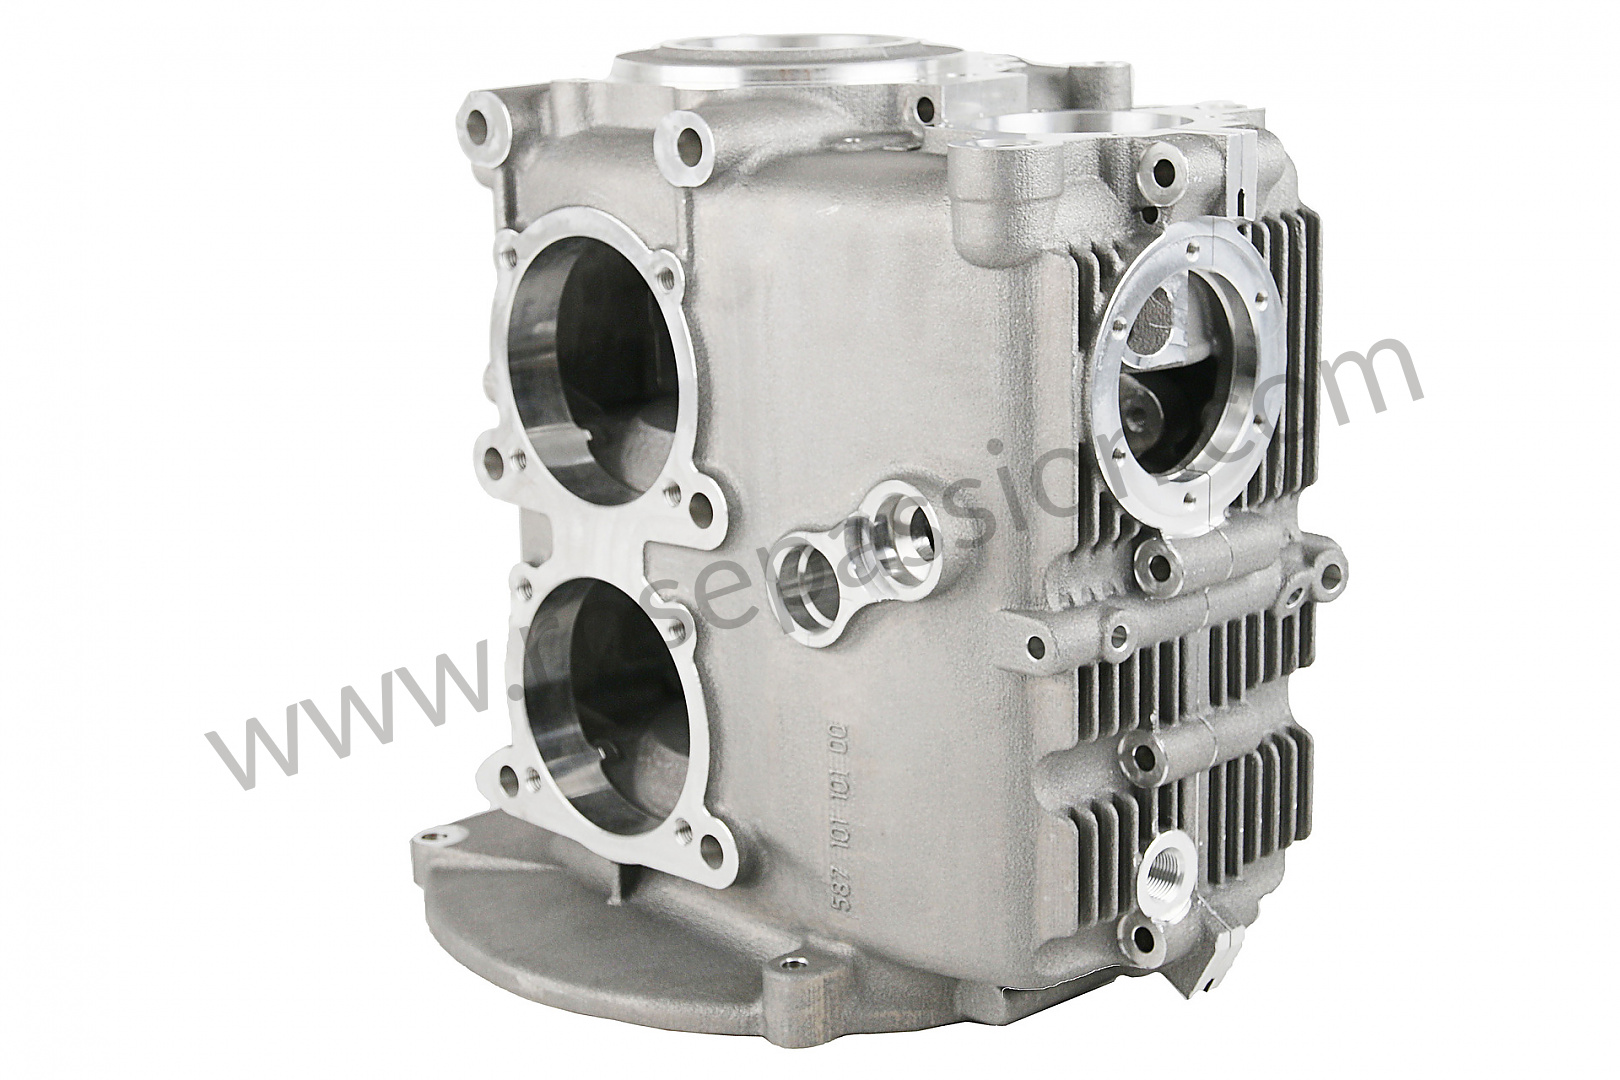 P273523 - 58710199900 - Engine sump 356 carrera version with bushing  (58710190100,58710190400,69210100500,69210100501,69210100600,69210100601,69210100602,69210100700,69210100800)  for Porsche 356B T6 / 1963 / 2000 carrera gt (587 / 2) / Coupe reutter b ...